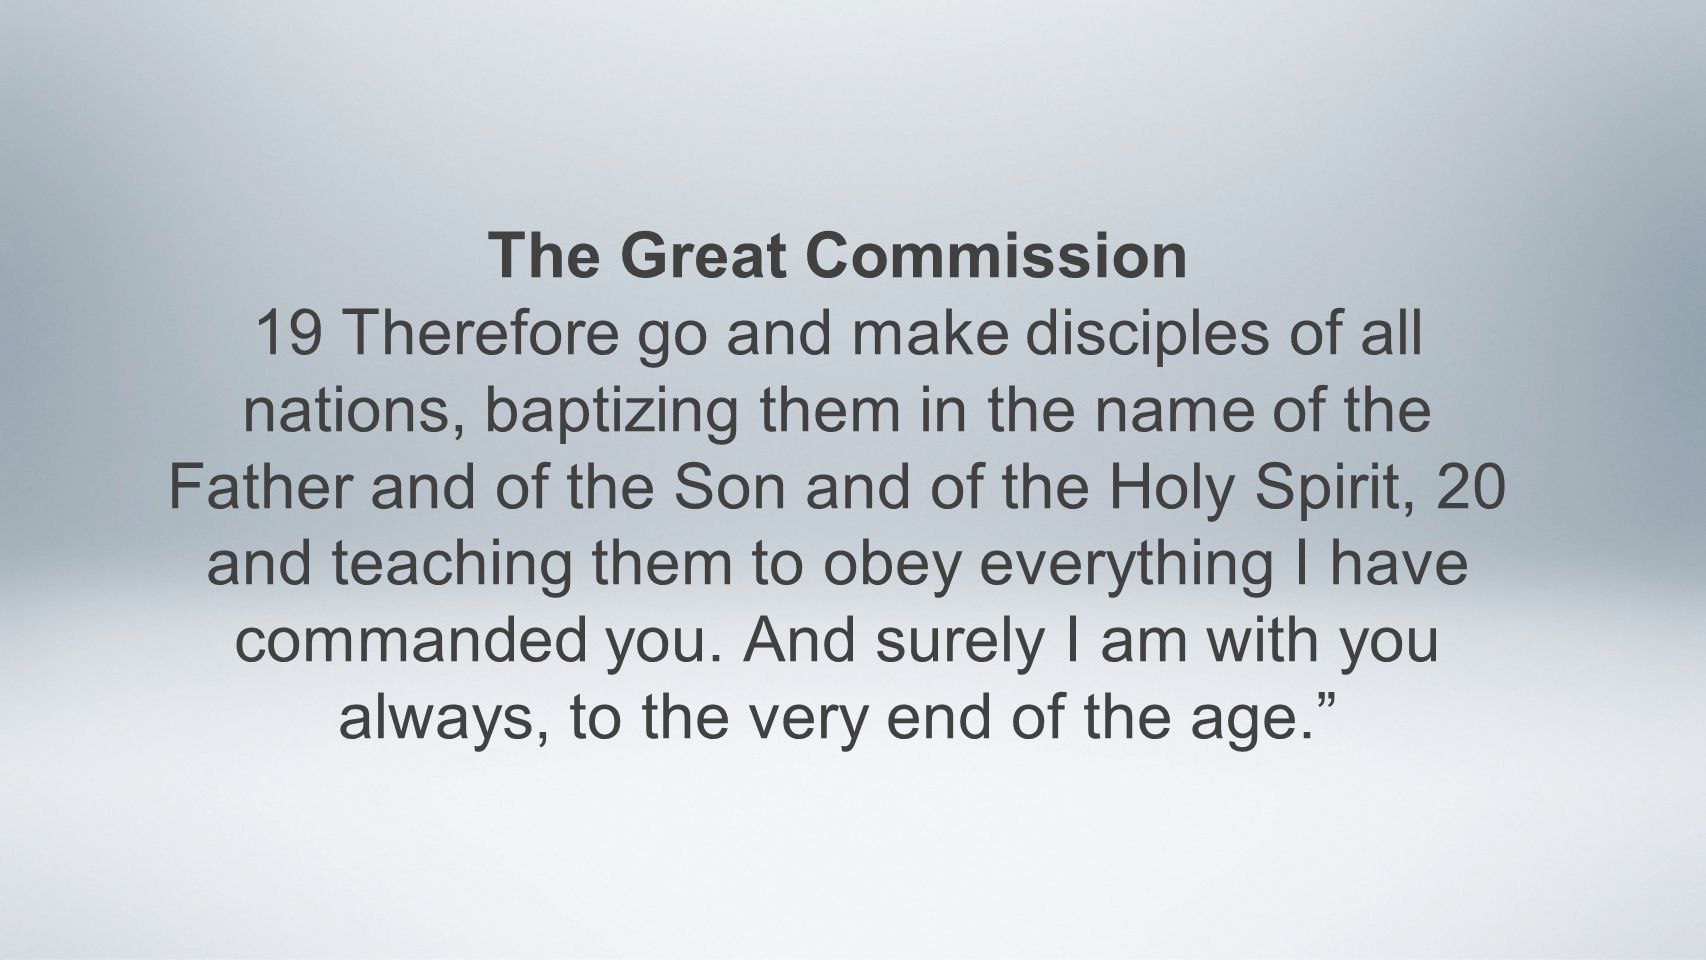 The Great Commission 19 Therefore go and make disciples of all nations, baptizing them in the name of the Father and of the Son and of the Holy Spirit, 20 and teaching them to obey everything I have commanded you.